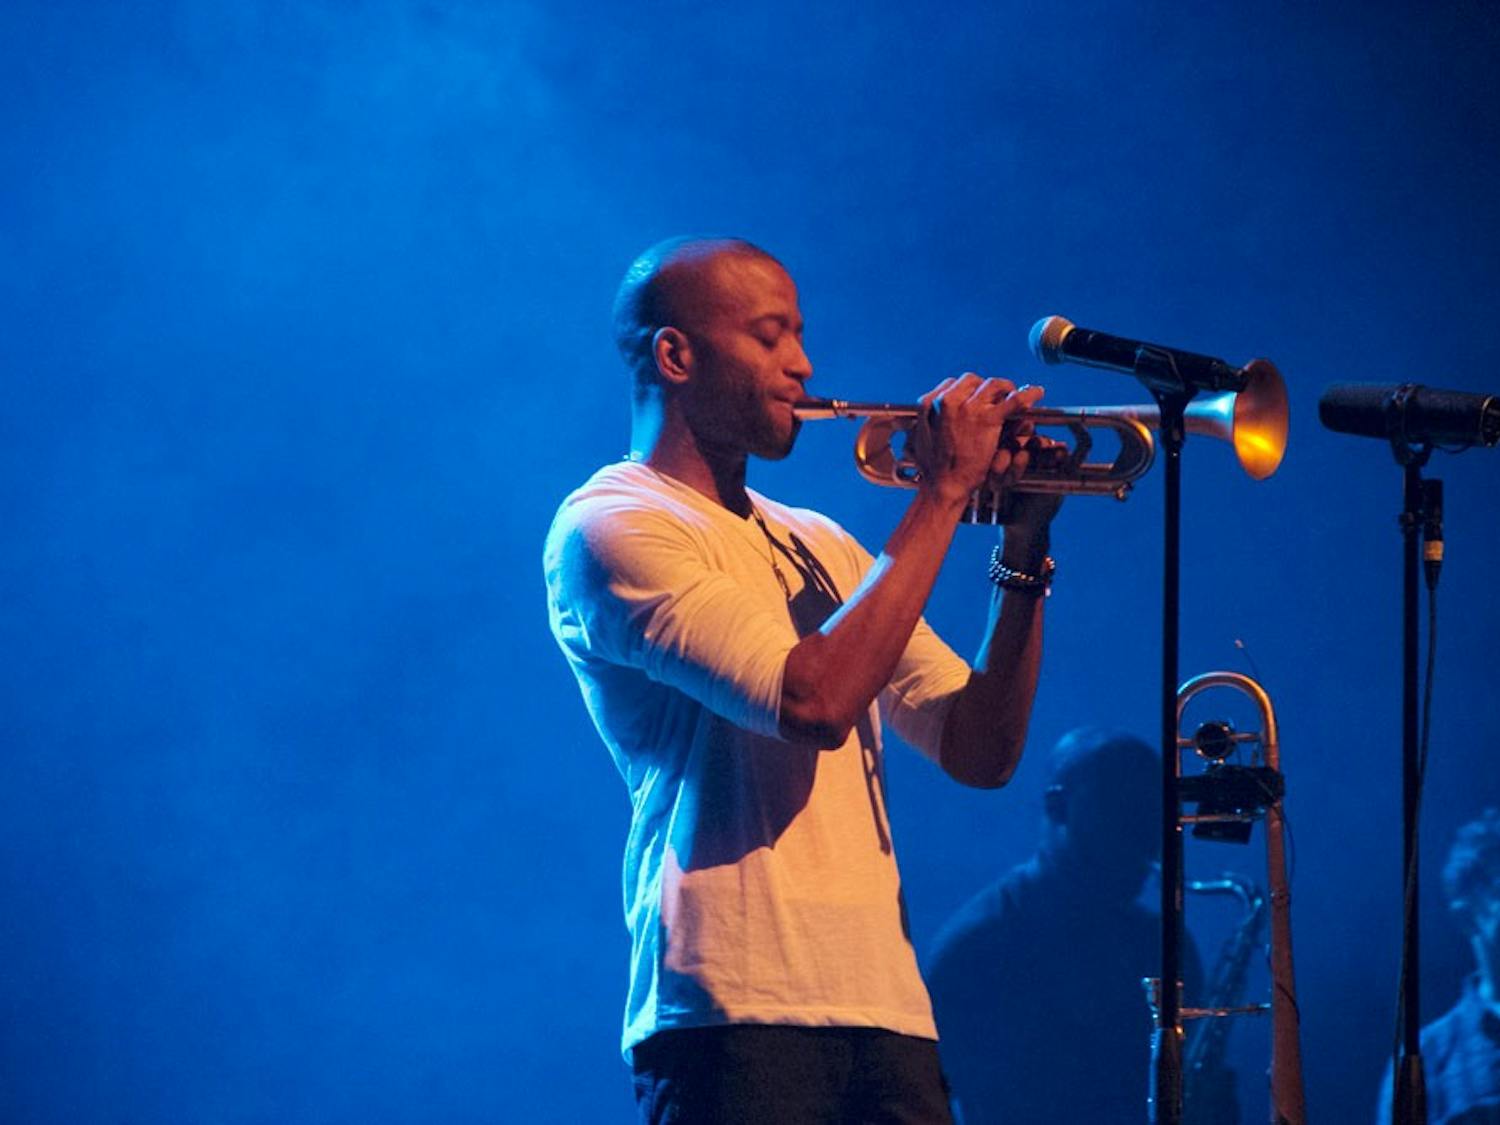 Troy Andrews, better known as Trombone Shorty rocked the CFA Monday night. He and his band Orleans Avenue played for a sold out crowd of over 1100 people.